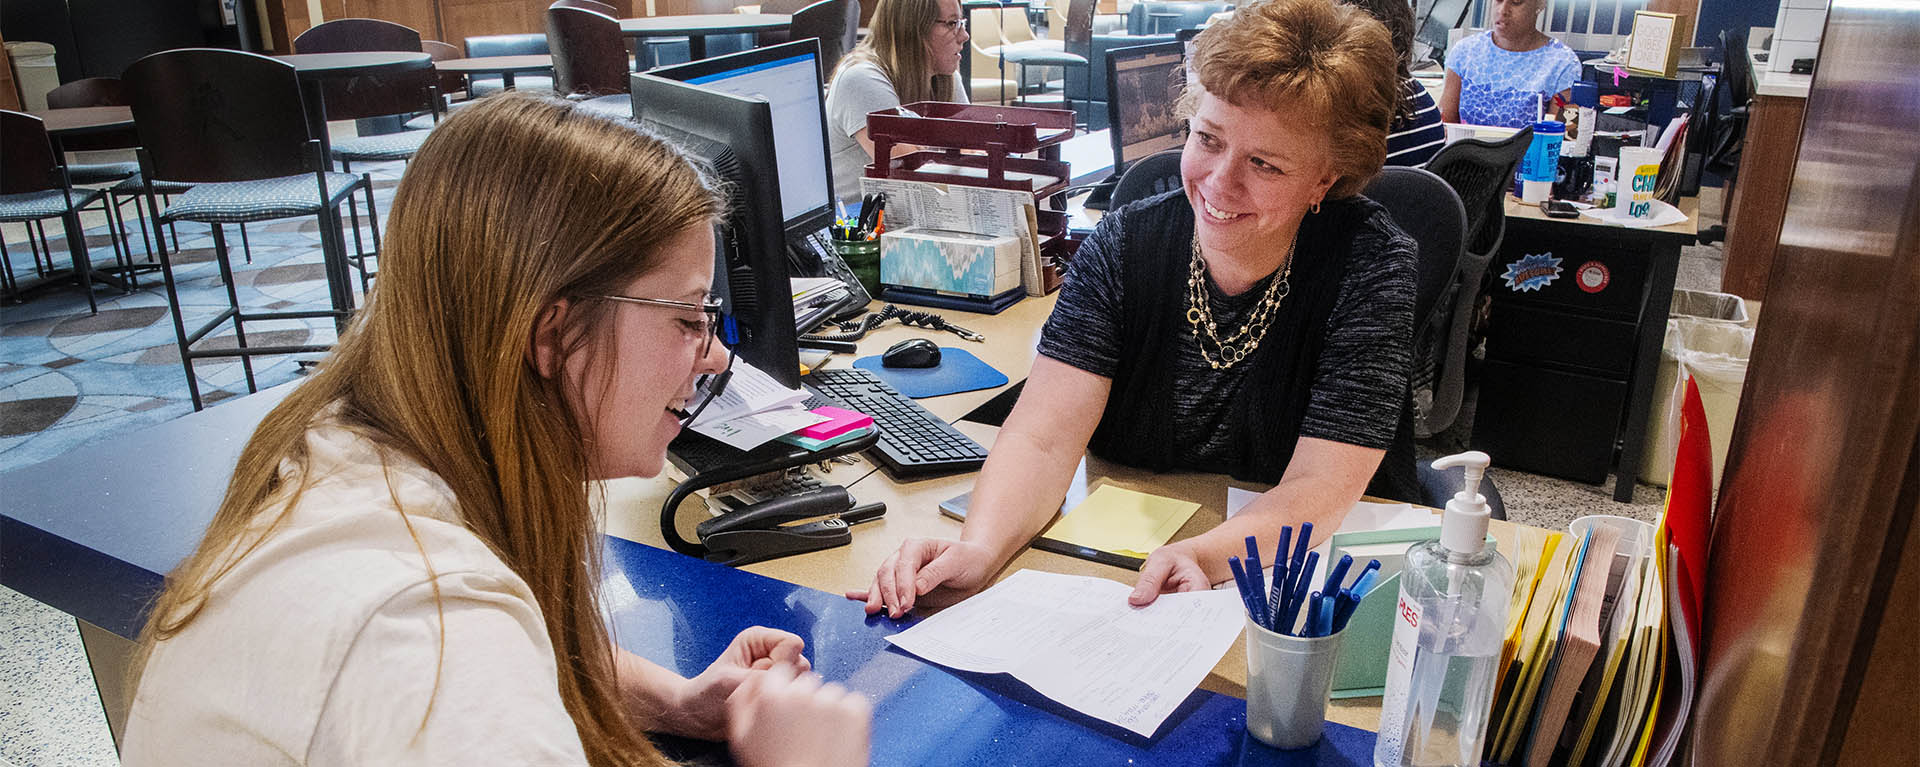 A Student One Stop staff member assists a Washburn student in the Welcome Center.